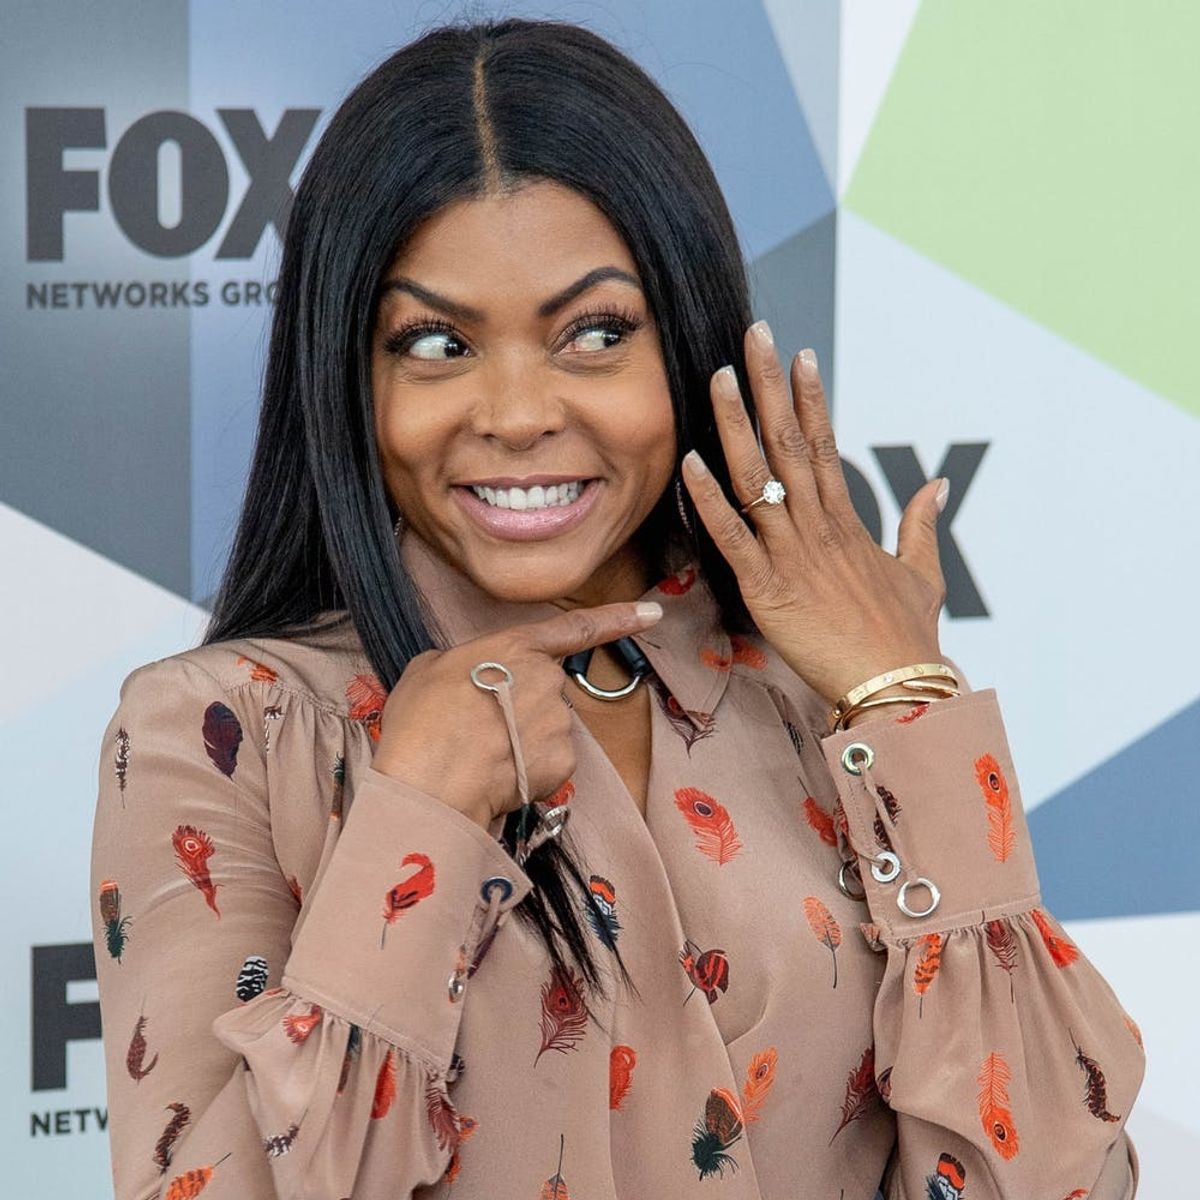 13 Celebrities Who Got Engaged in 2018 — and Their Rings!